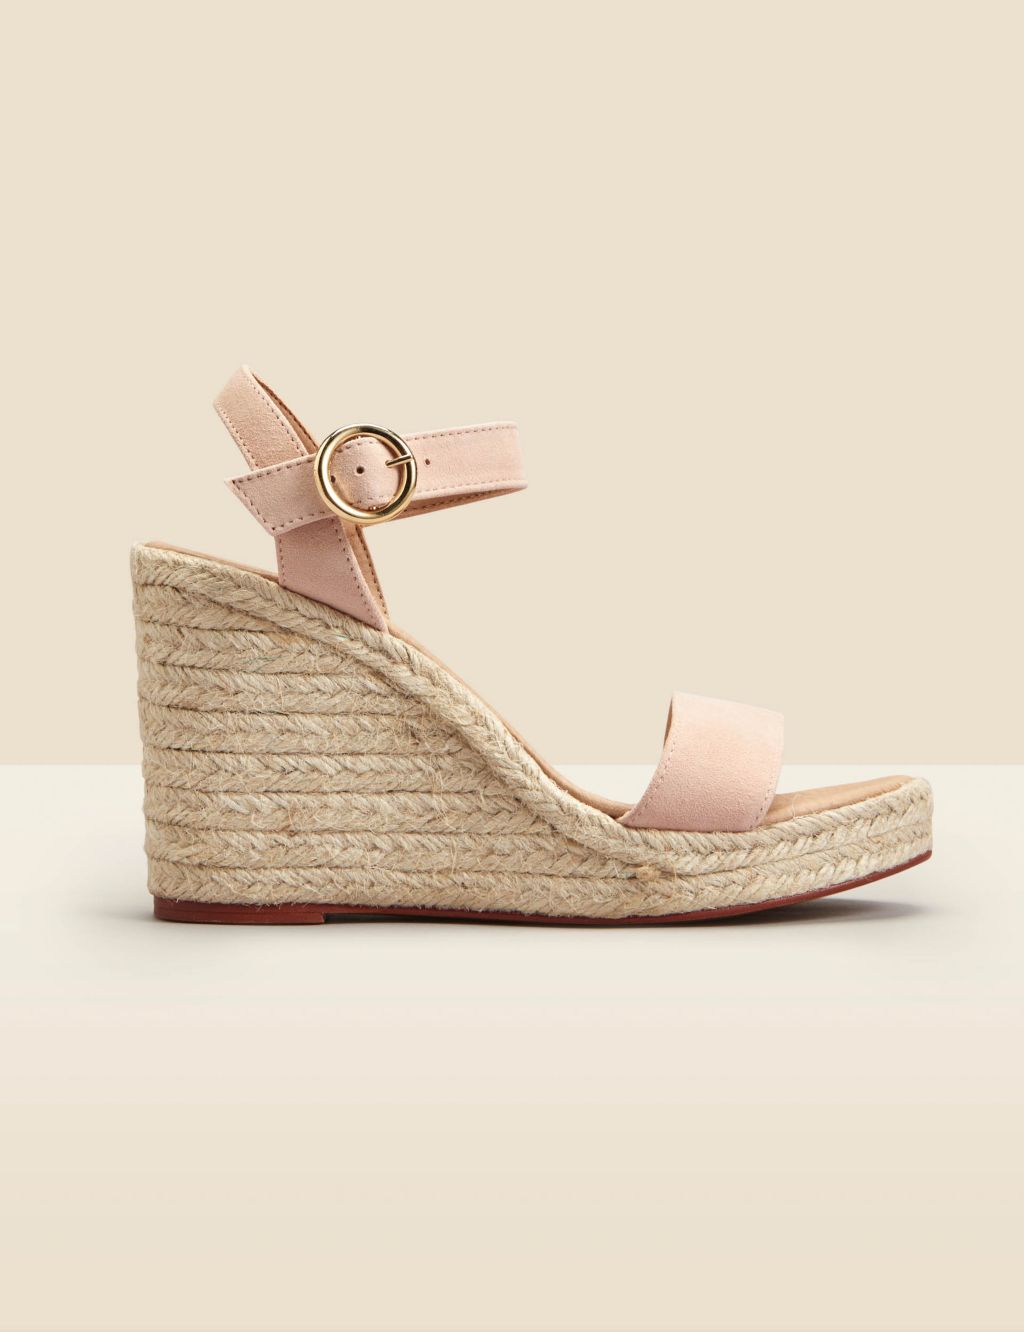 Suede Buckle Ankle Strap Wedge Espadrilles image 1